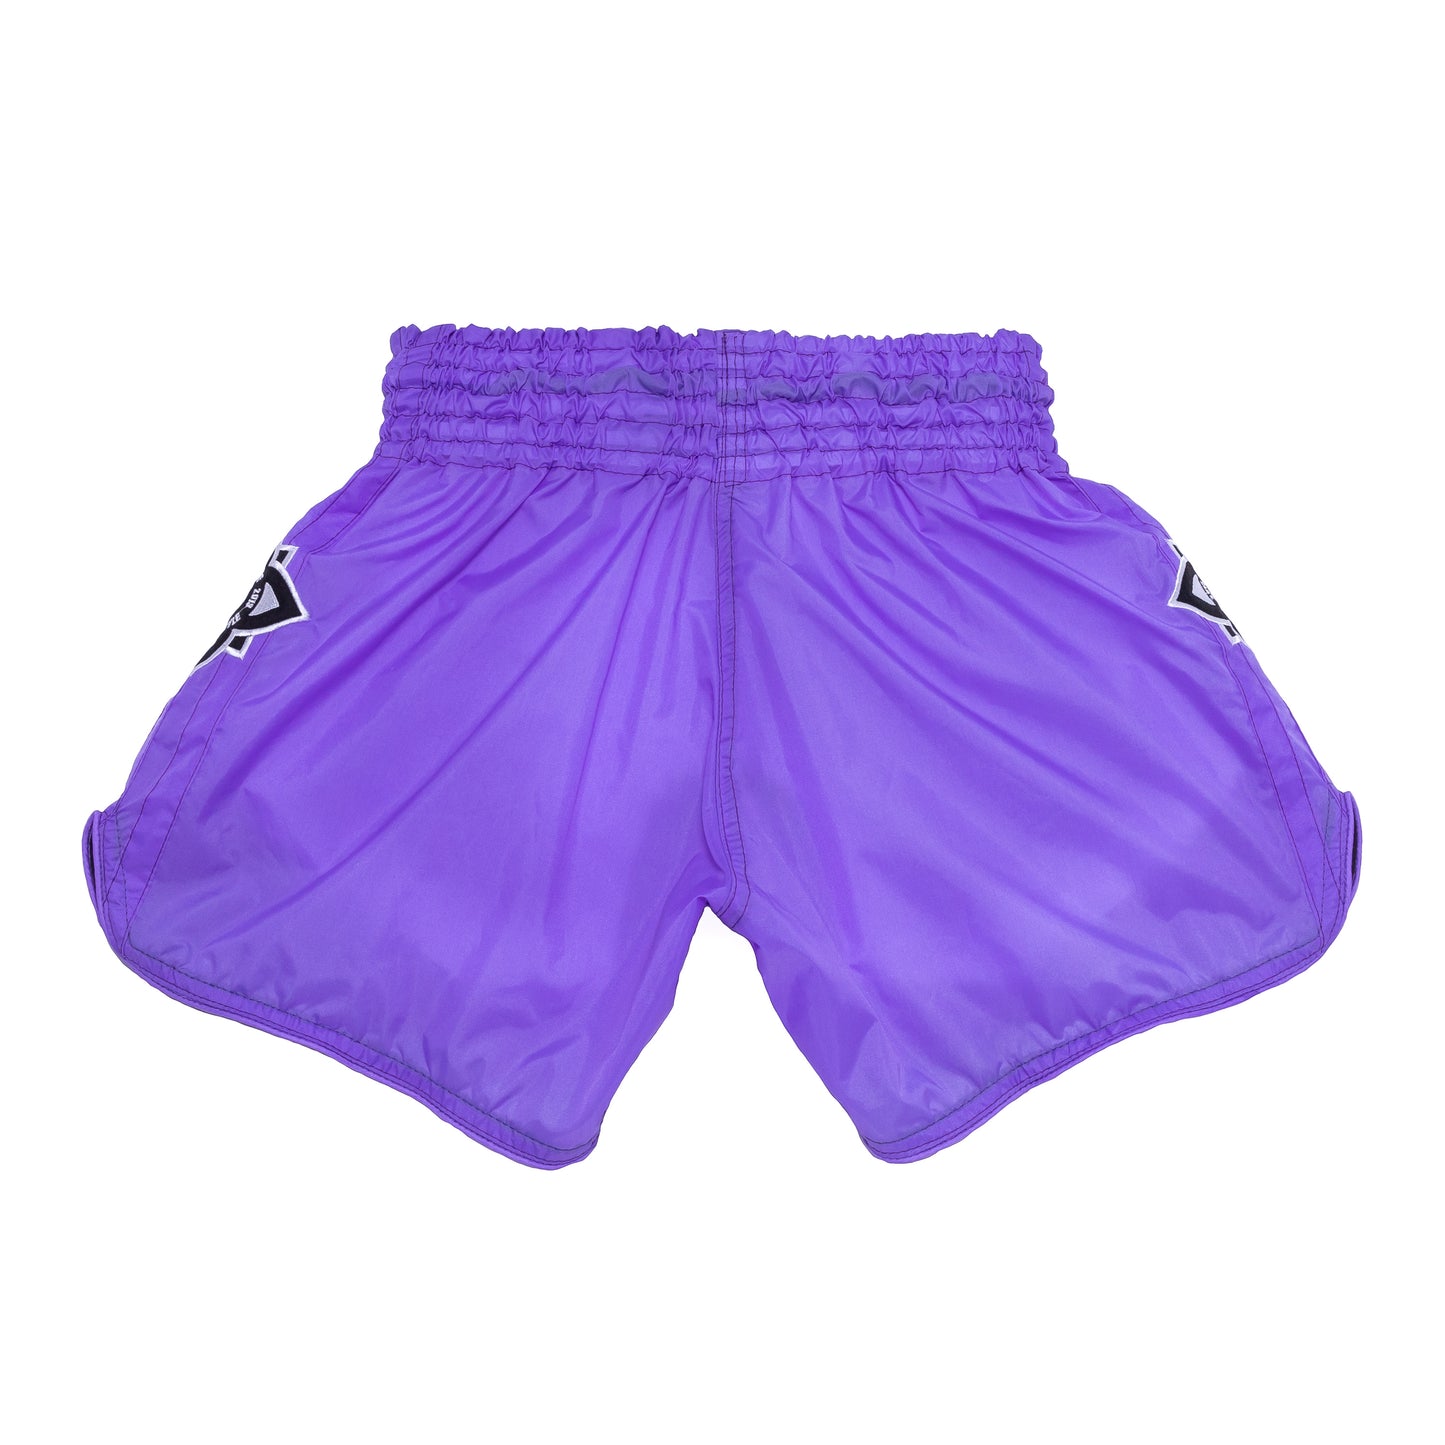 InFightStyle Nylon Lotus Retro Muay Thai Training Shorts | Purple Passion for Performance and Style